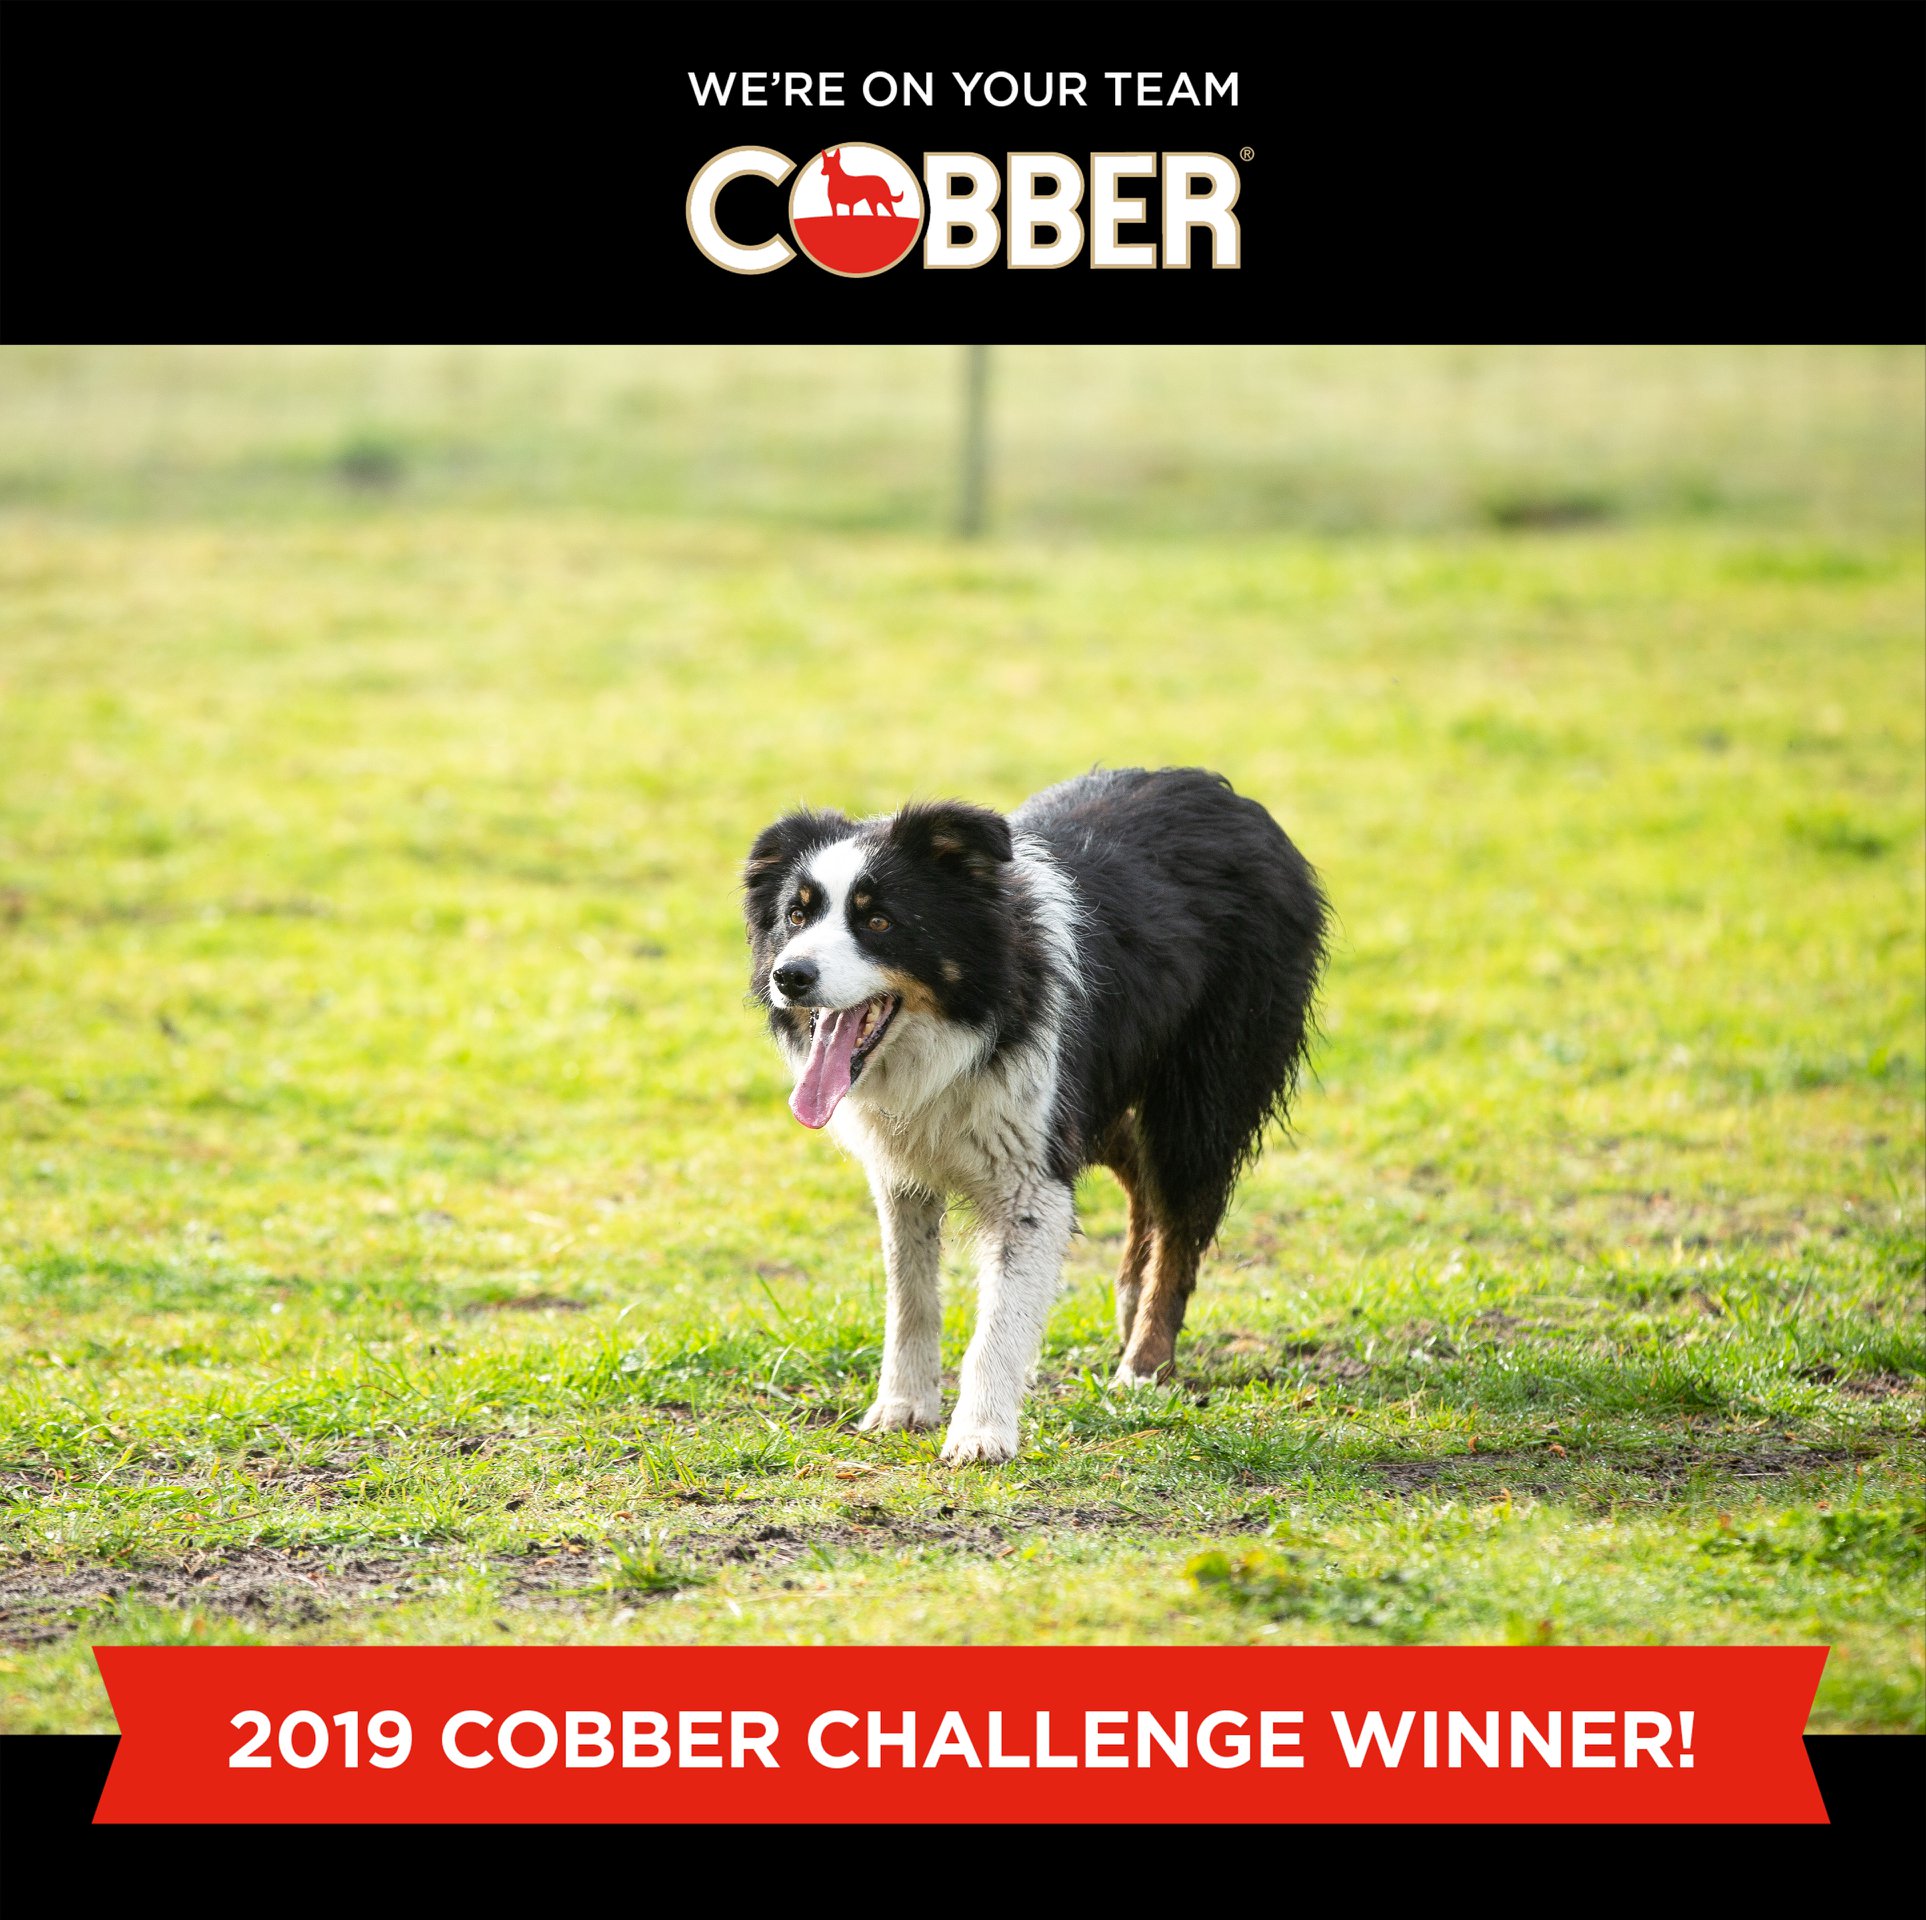 Sires Bauers Working Border Collies